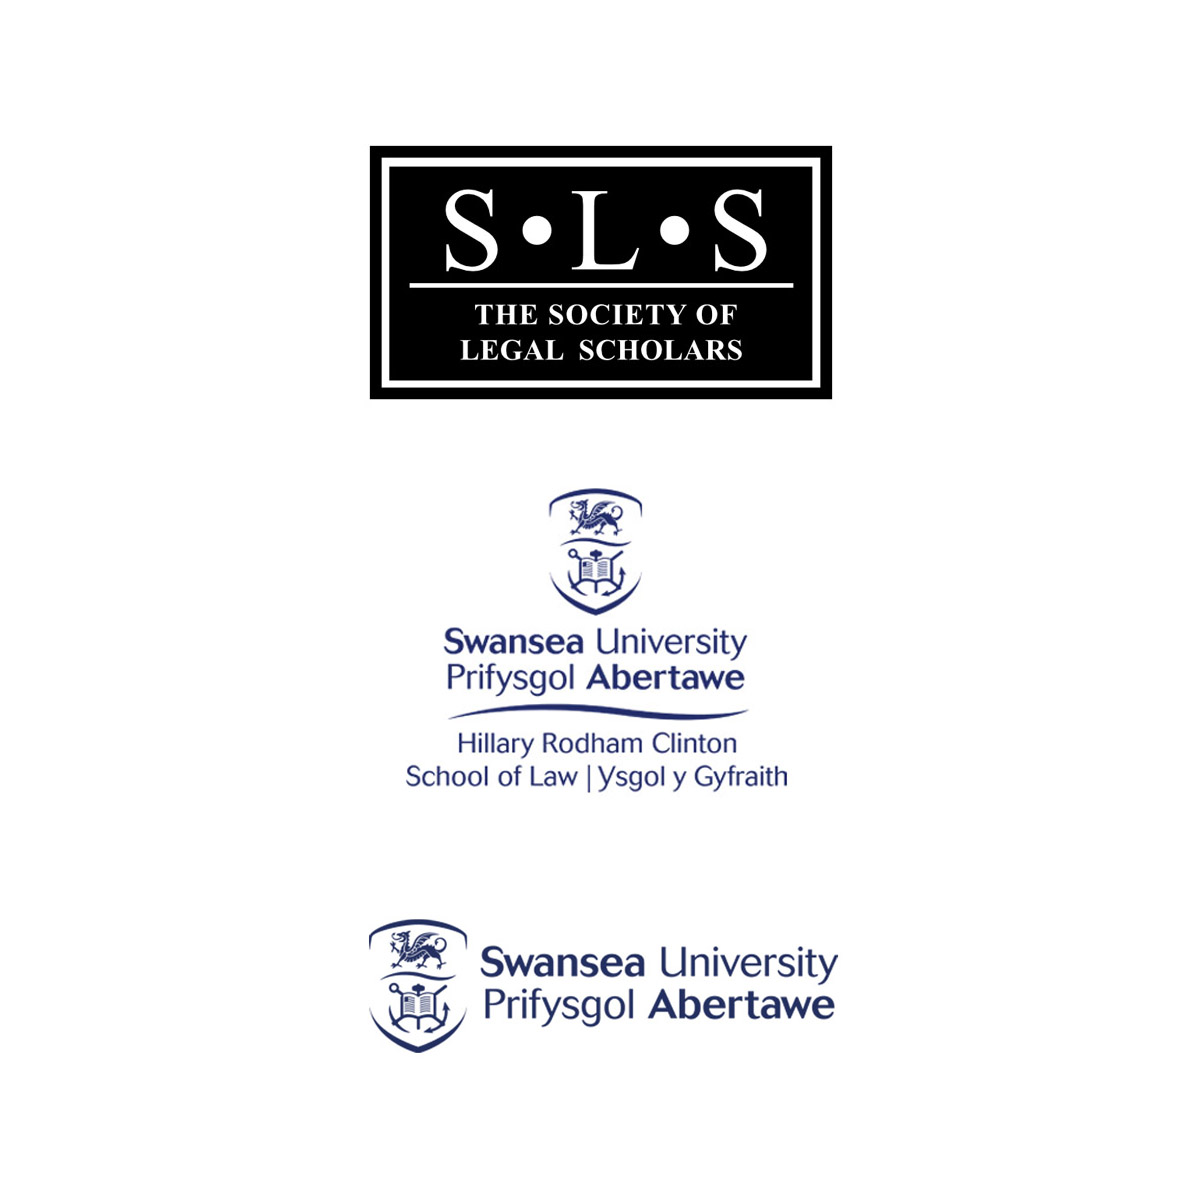 The logos of the SLS, School of Law and Swansea University